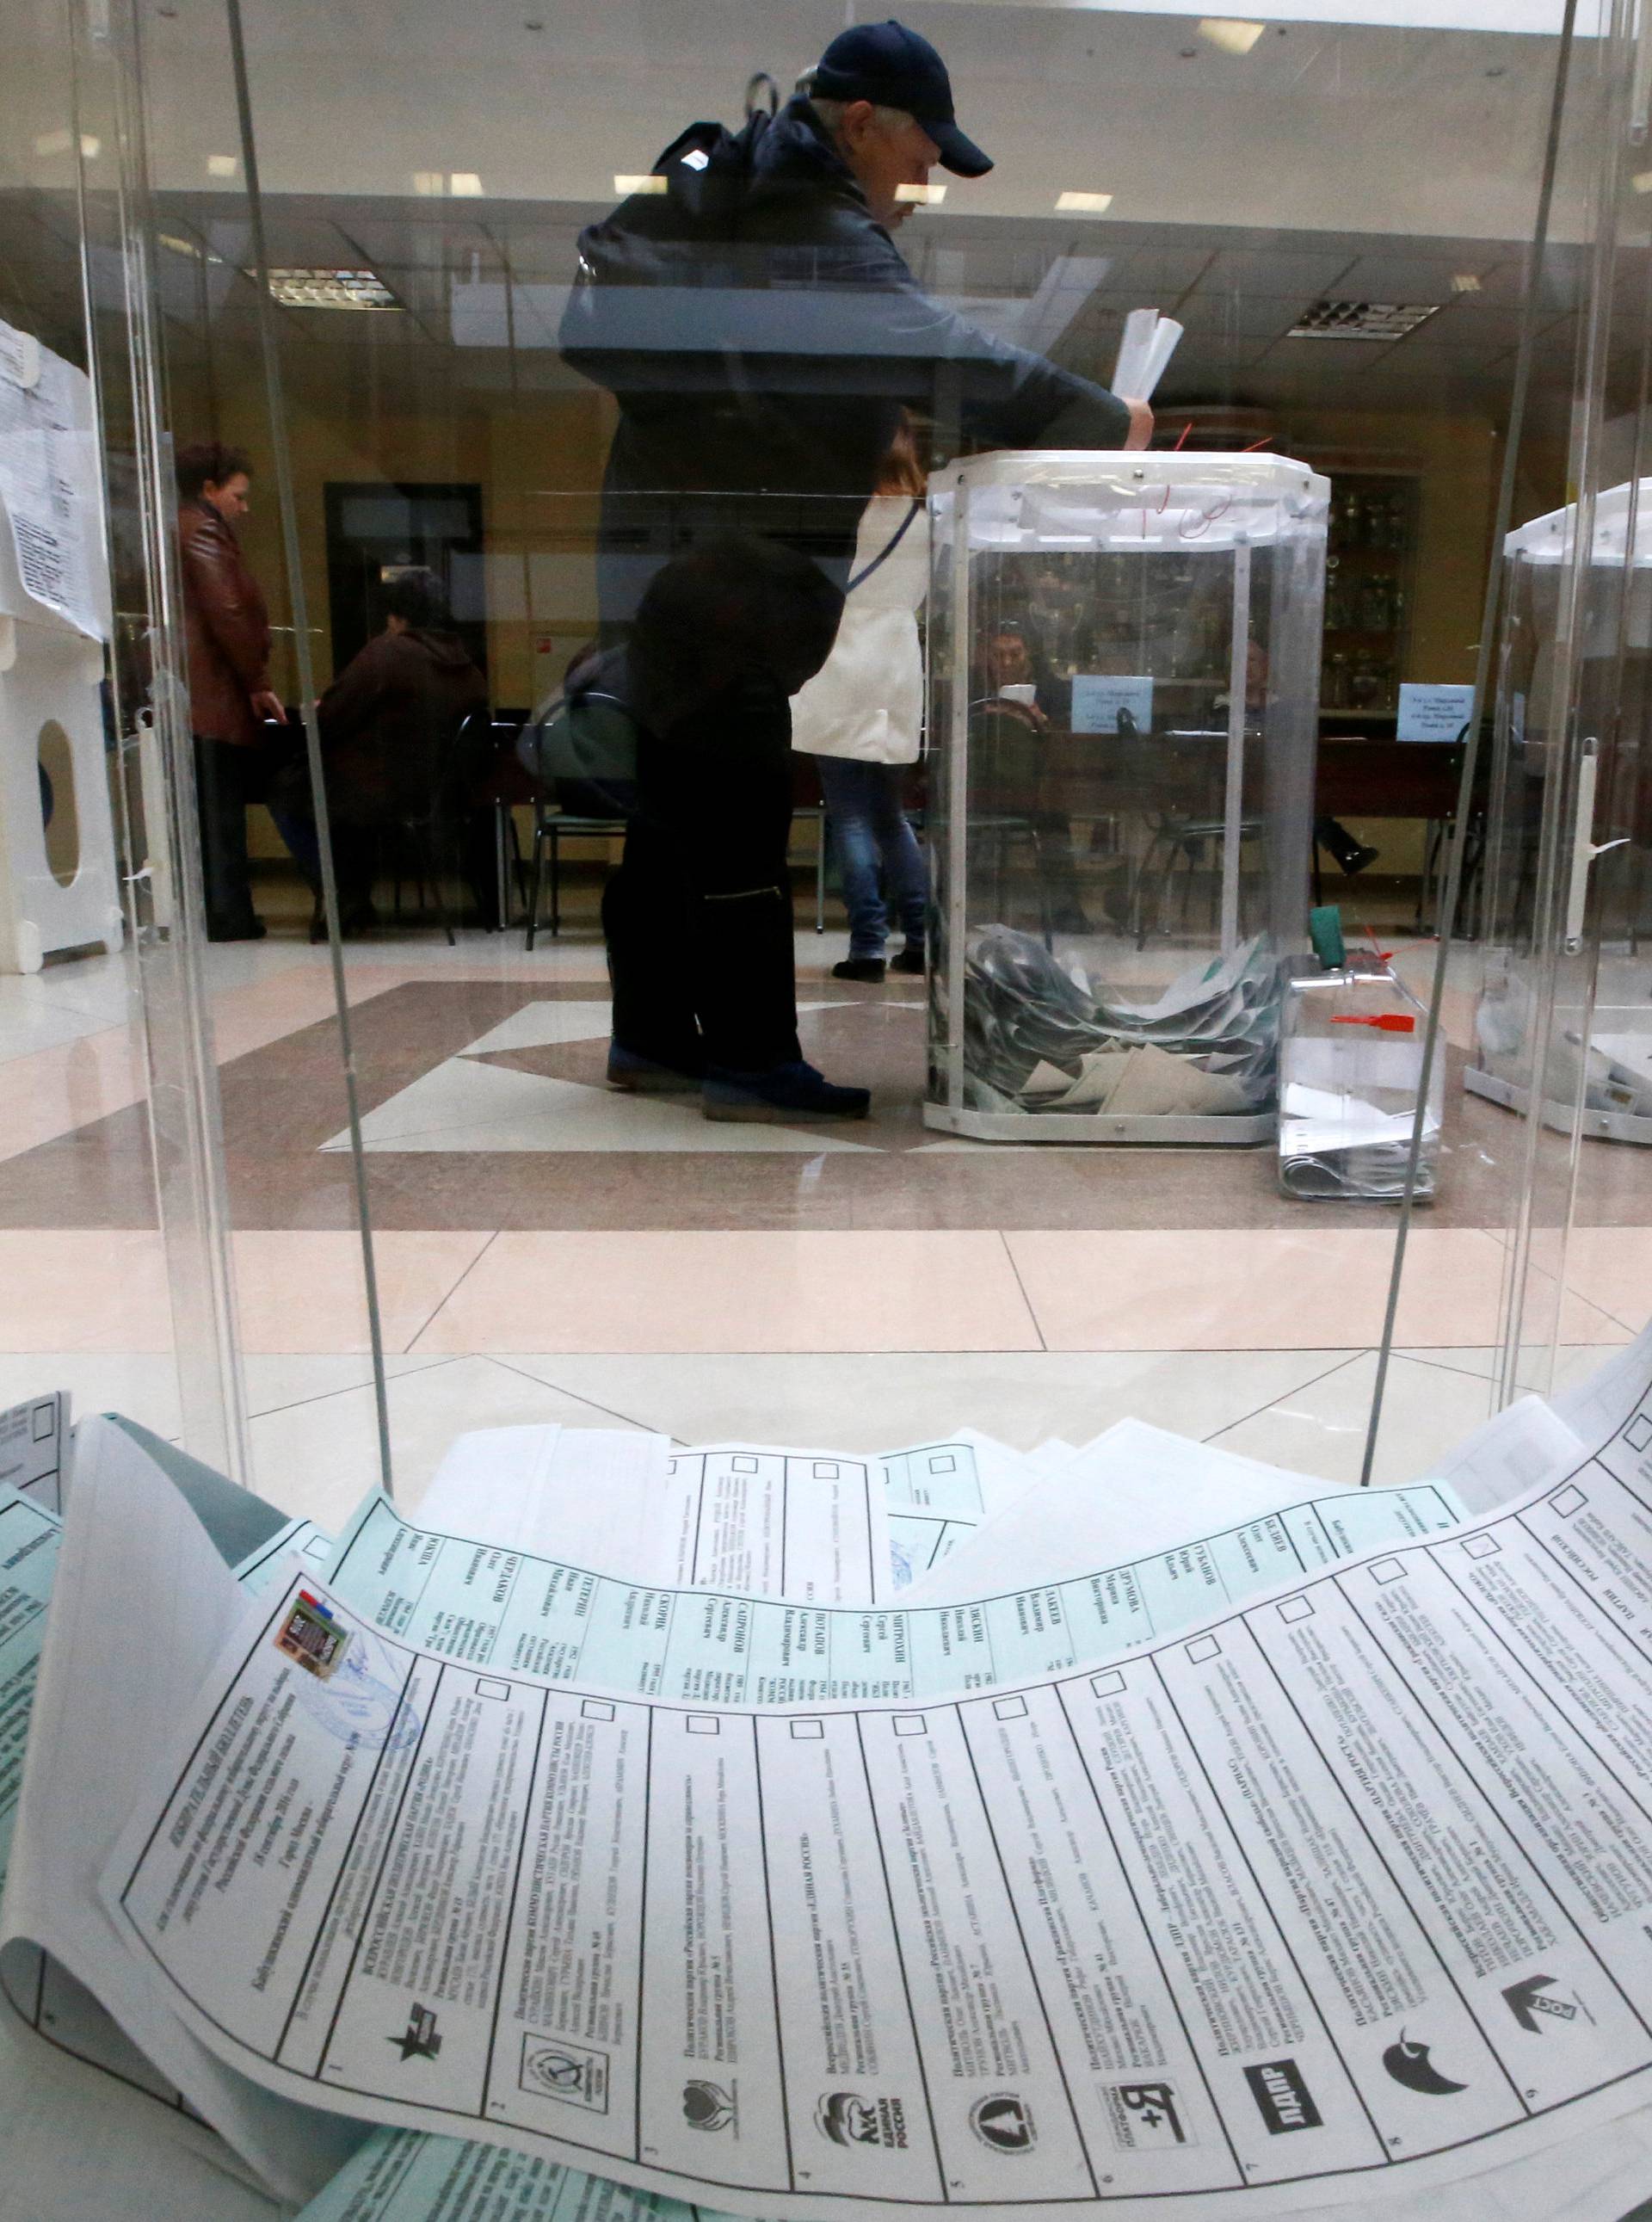 Man casts his ballot at polling station during parliamentary election in Moscow